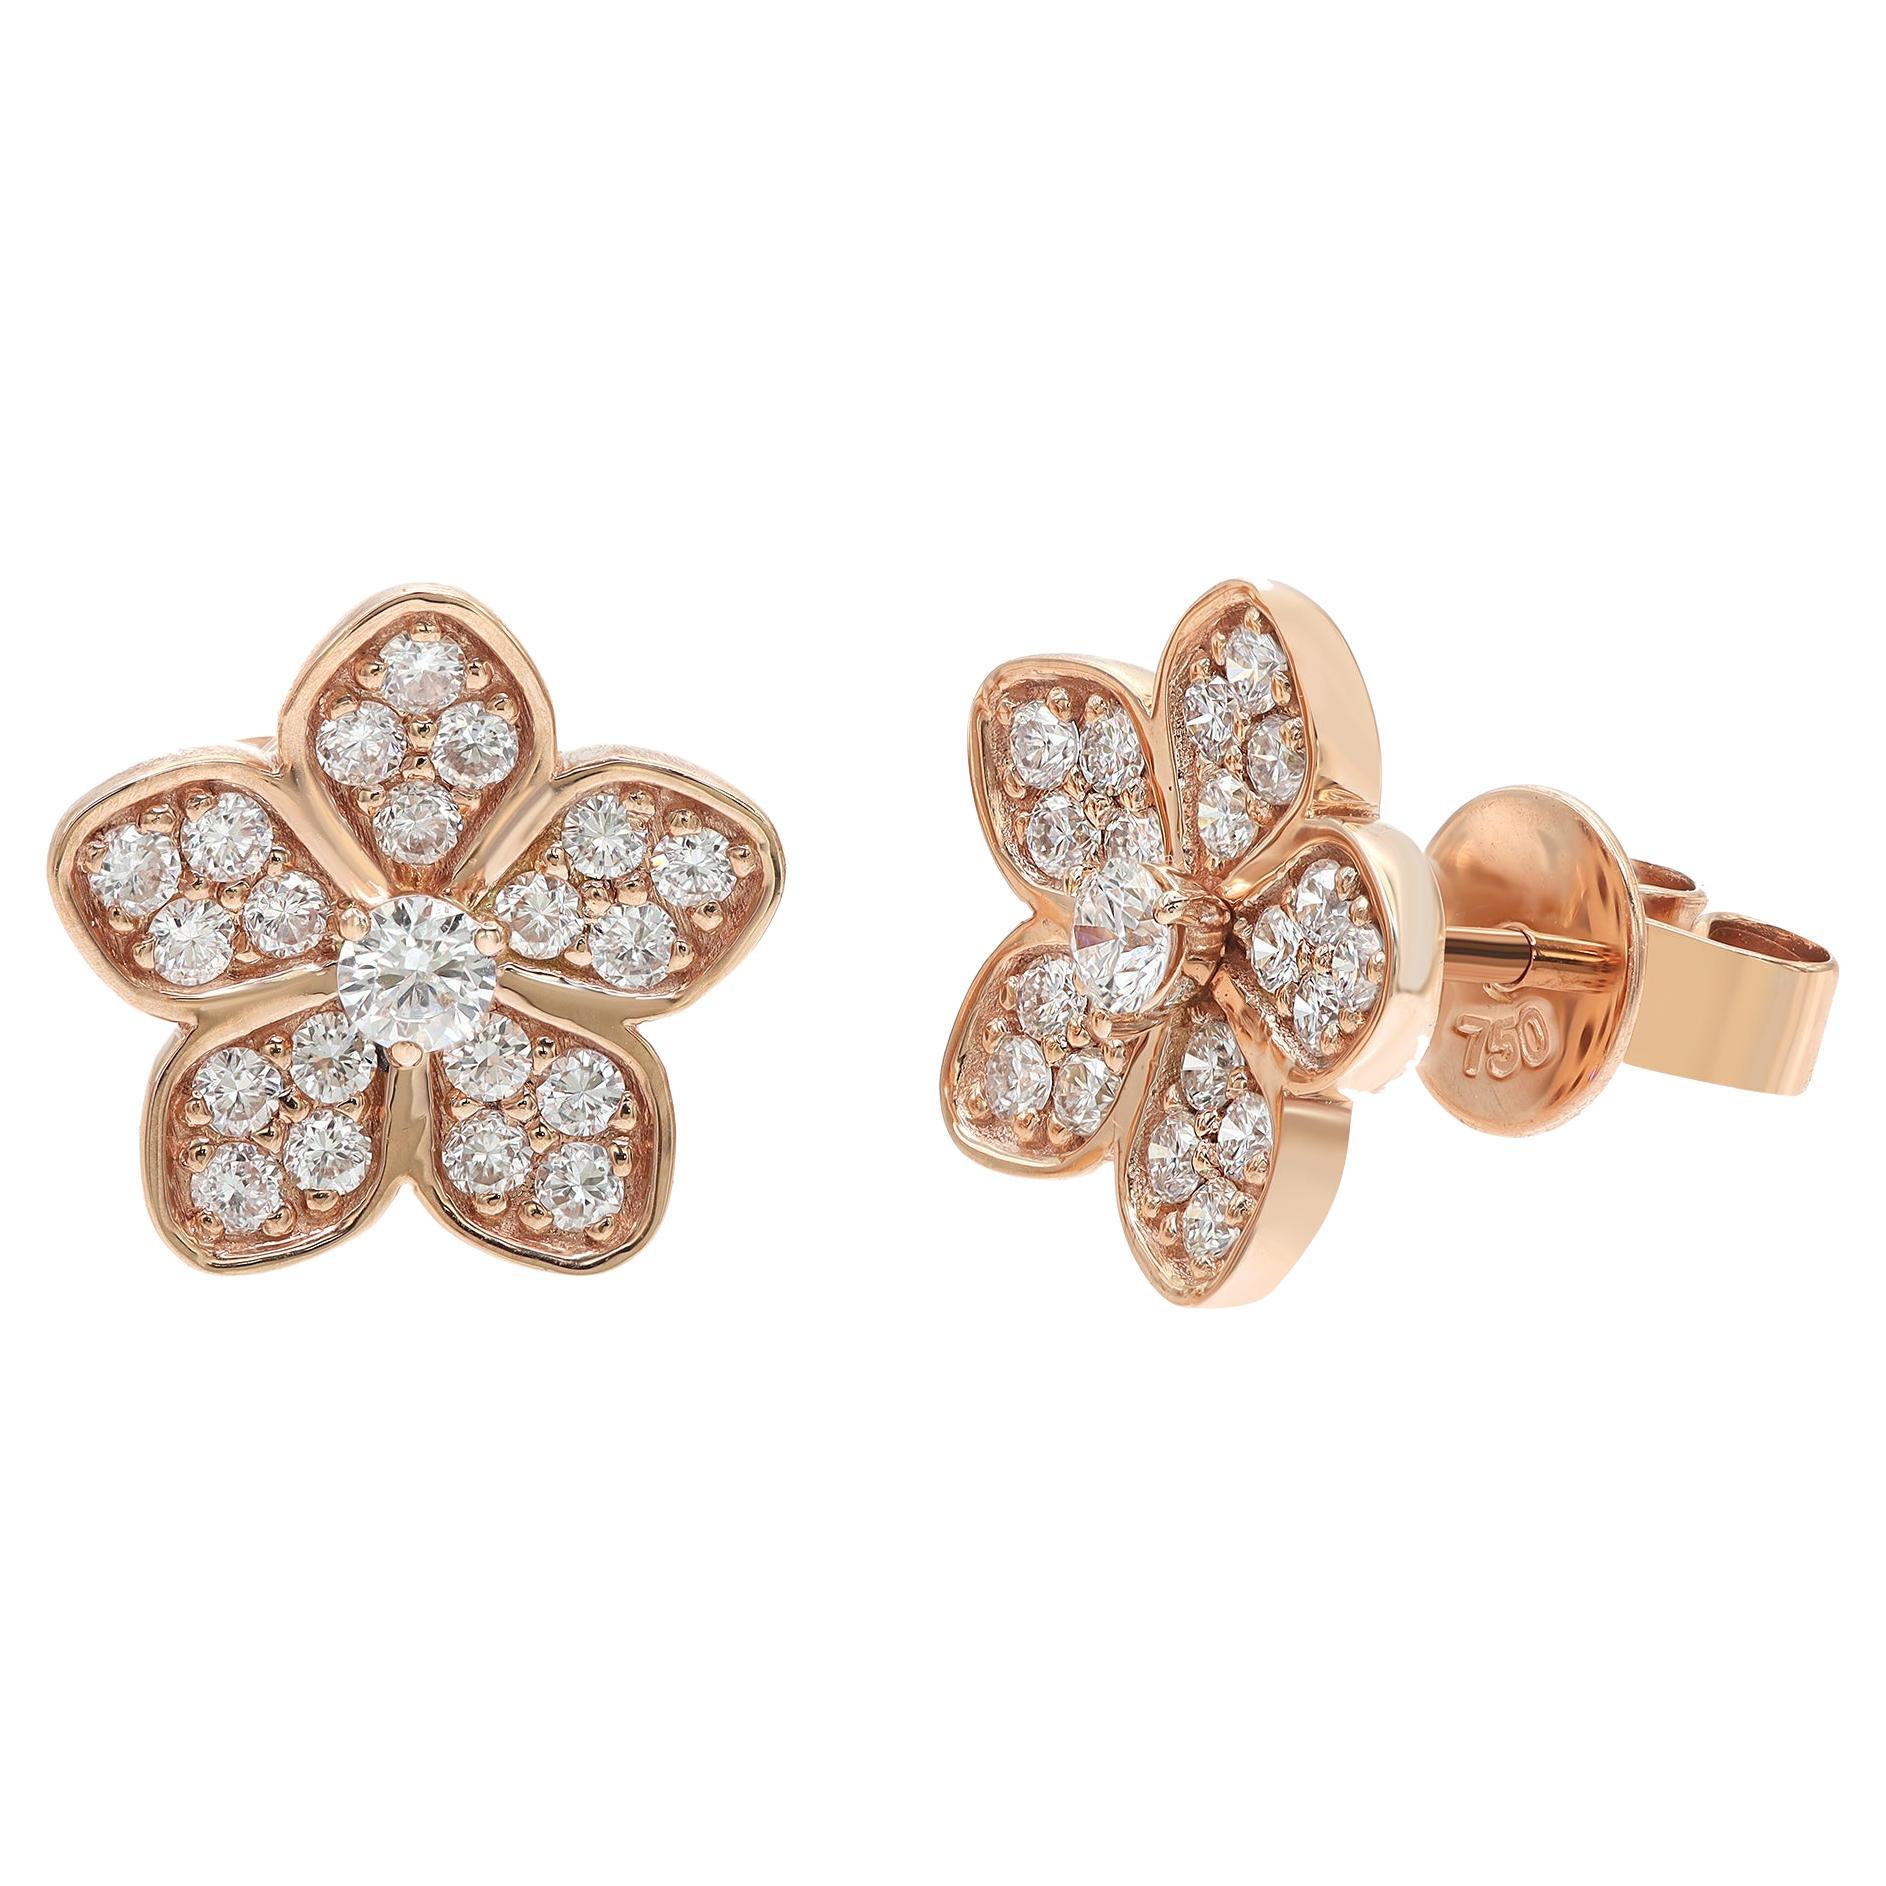 Pave Set Round Cut Diamond Flower Stud Earrings 18K Rose Gold 0.52cttw For Sale